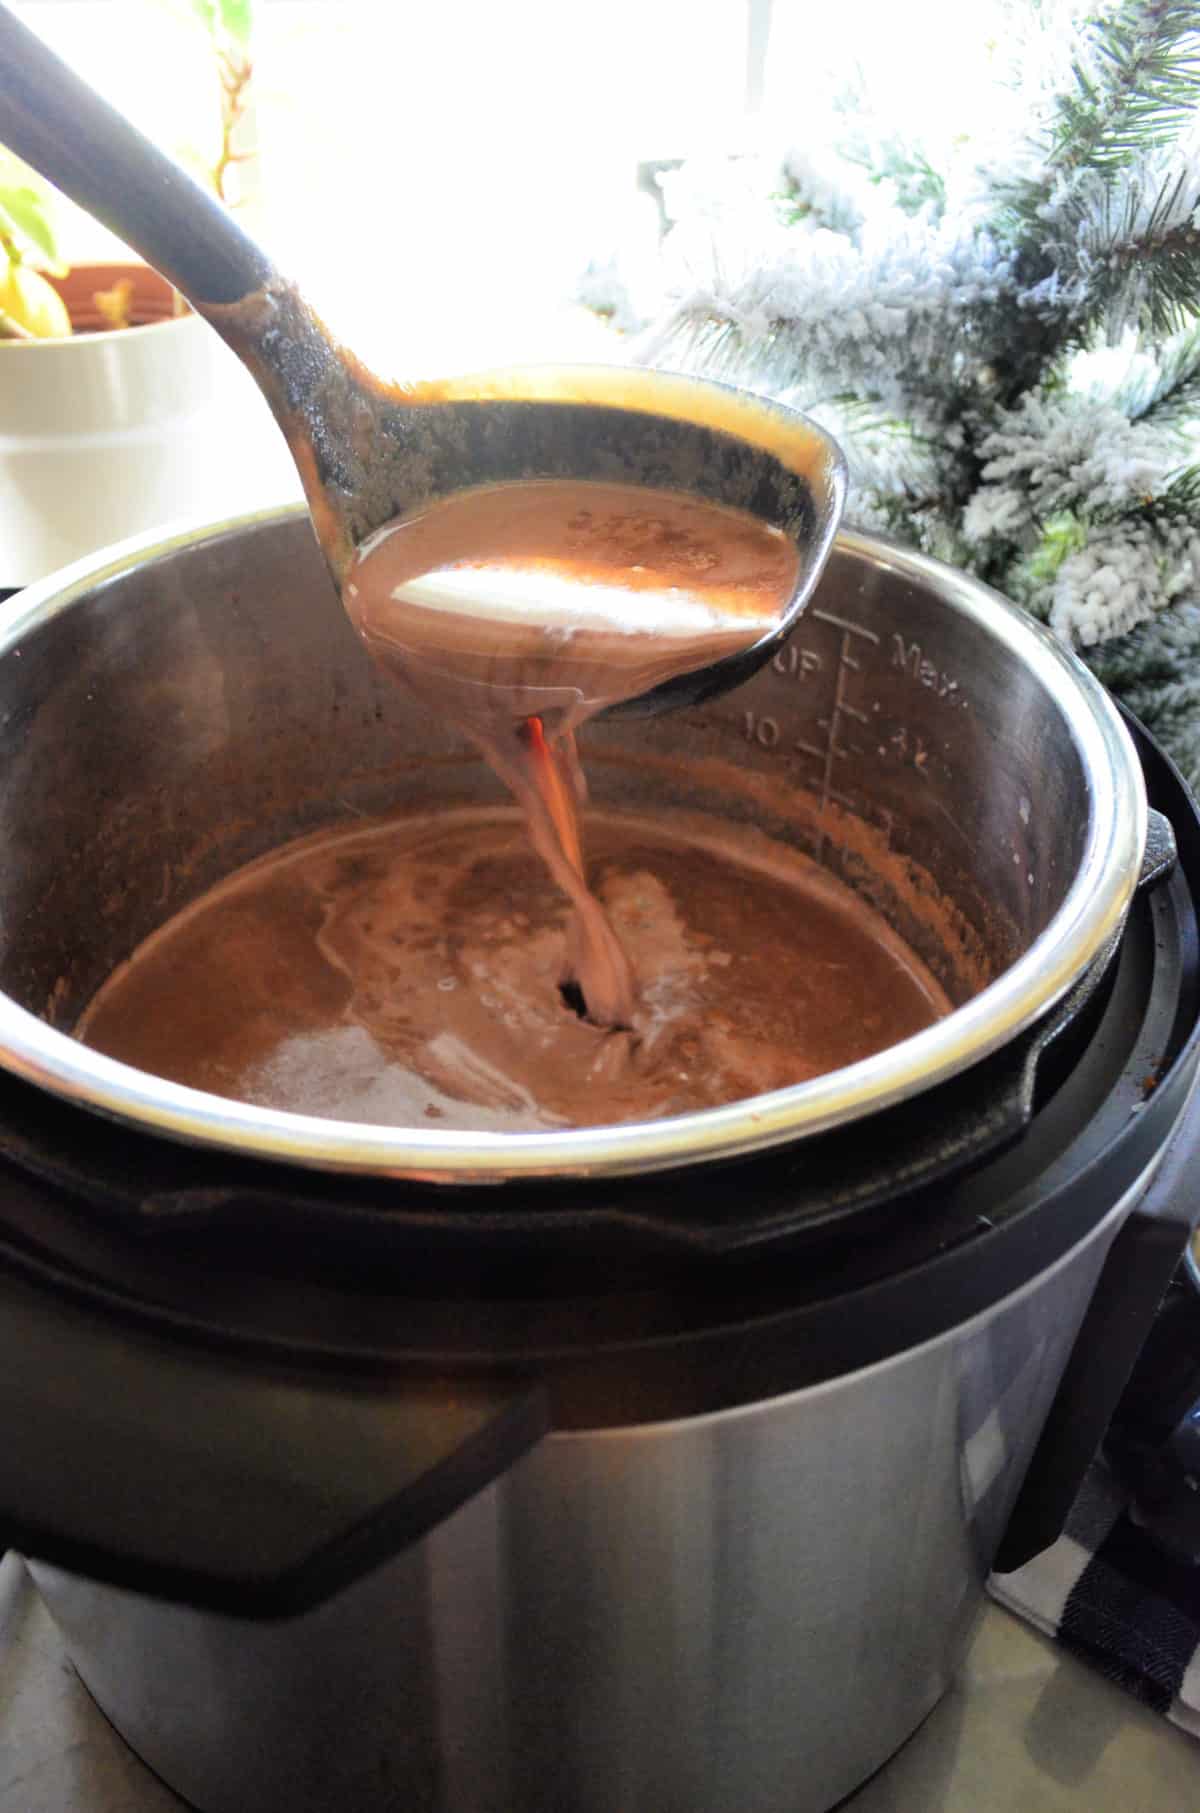 spoon ladling hot chocolate from the instant pot full of brown liquid.